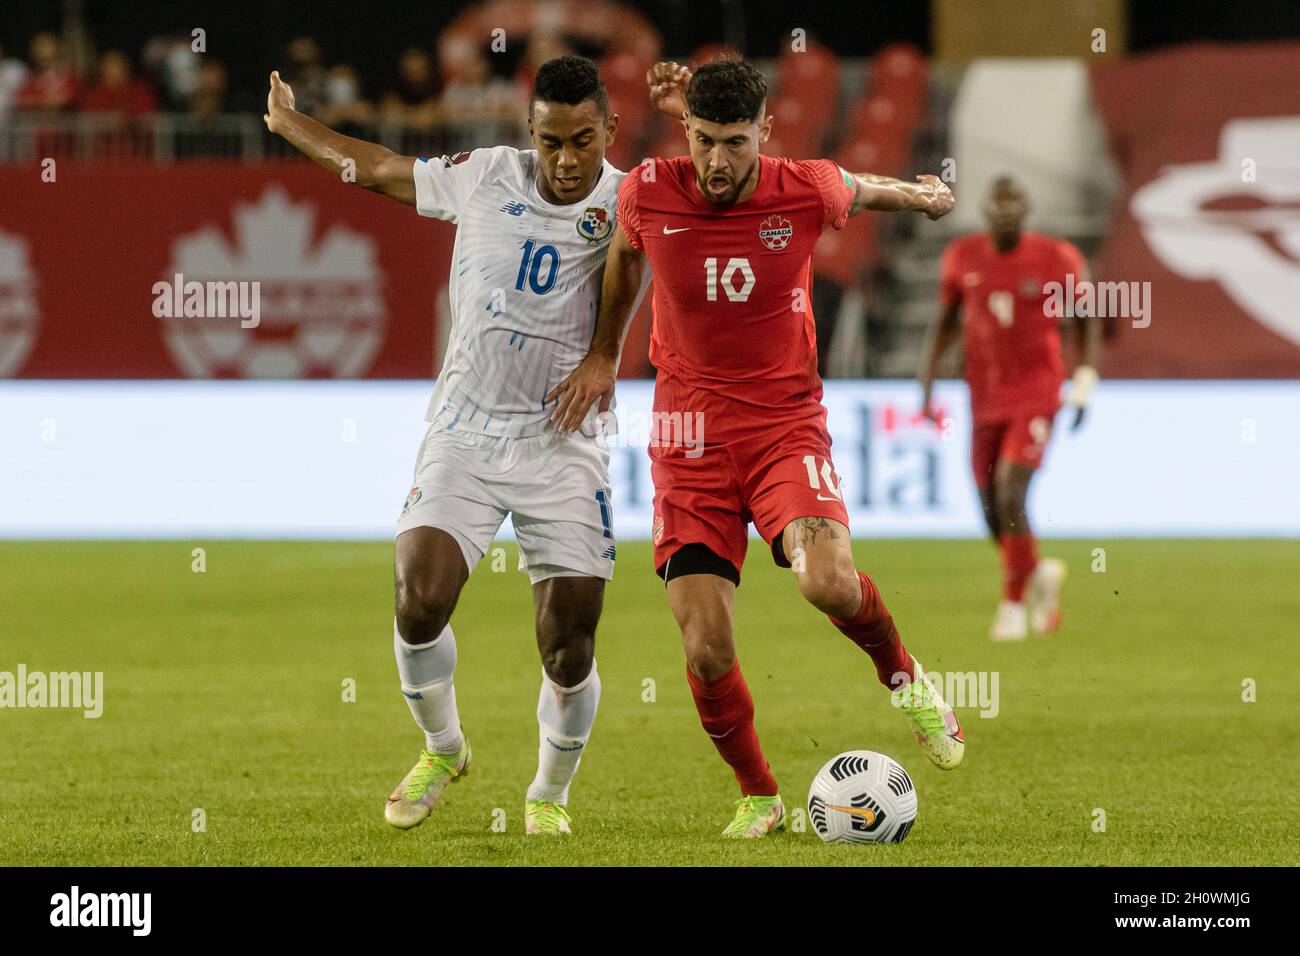 Toronto, Canada, October 13, 2021: Jonathan Osorio (R) of Team Canada and Édgar Bárcenas (L) of Team Panama compete for the ball during the CONCACAF FIFA World Cup Qualifying 2022 match at BMO Field in Toronto, Canada. Canada won the match 4-1. Credit: Phamai Techaphan/Alamy Live News Stock Photo